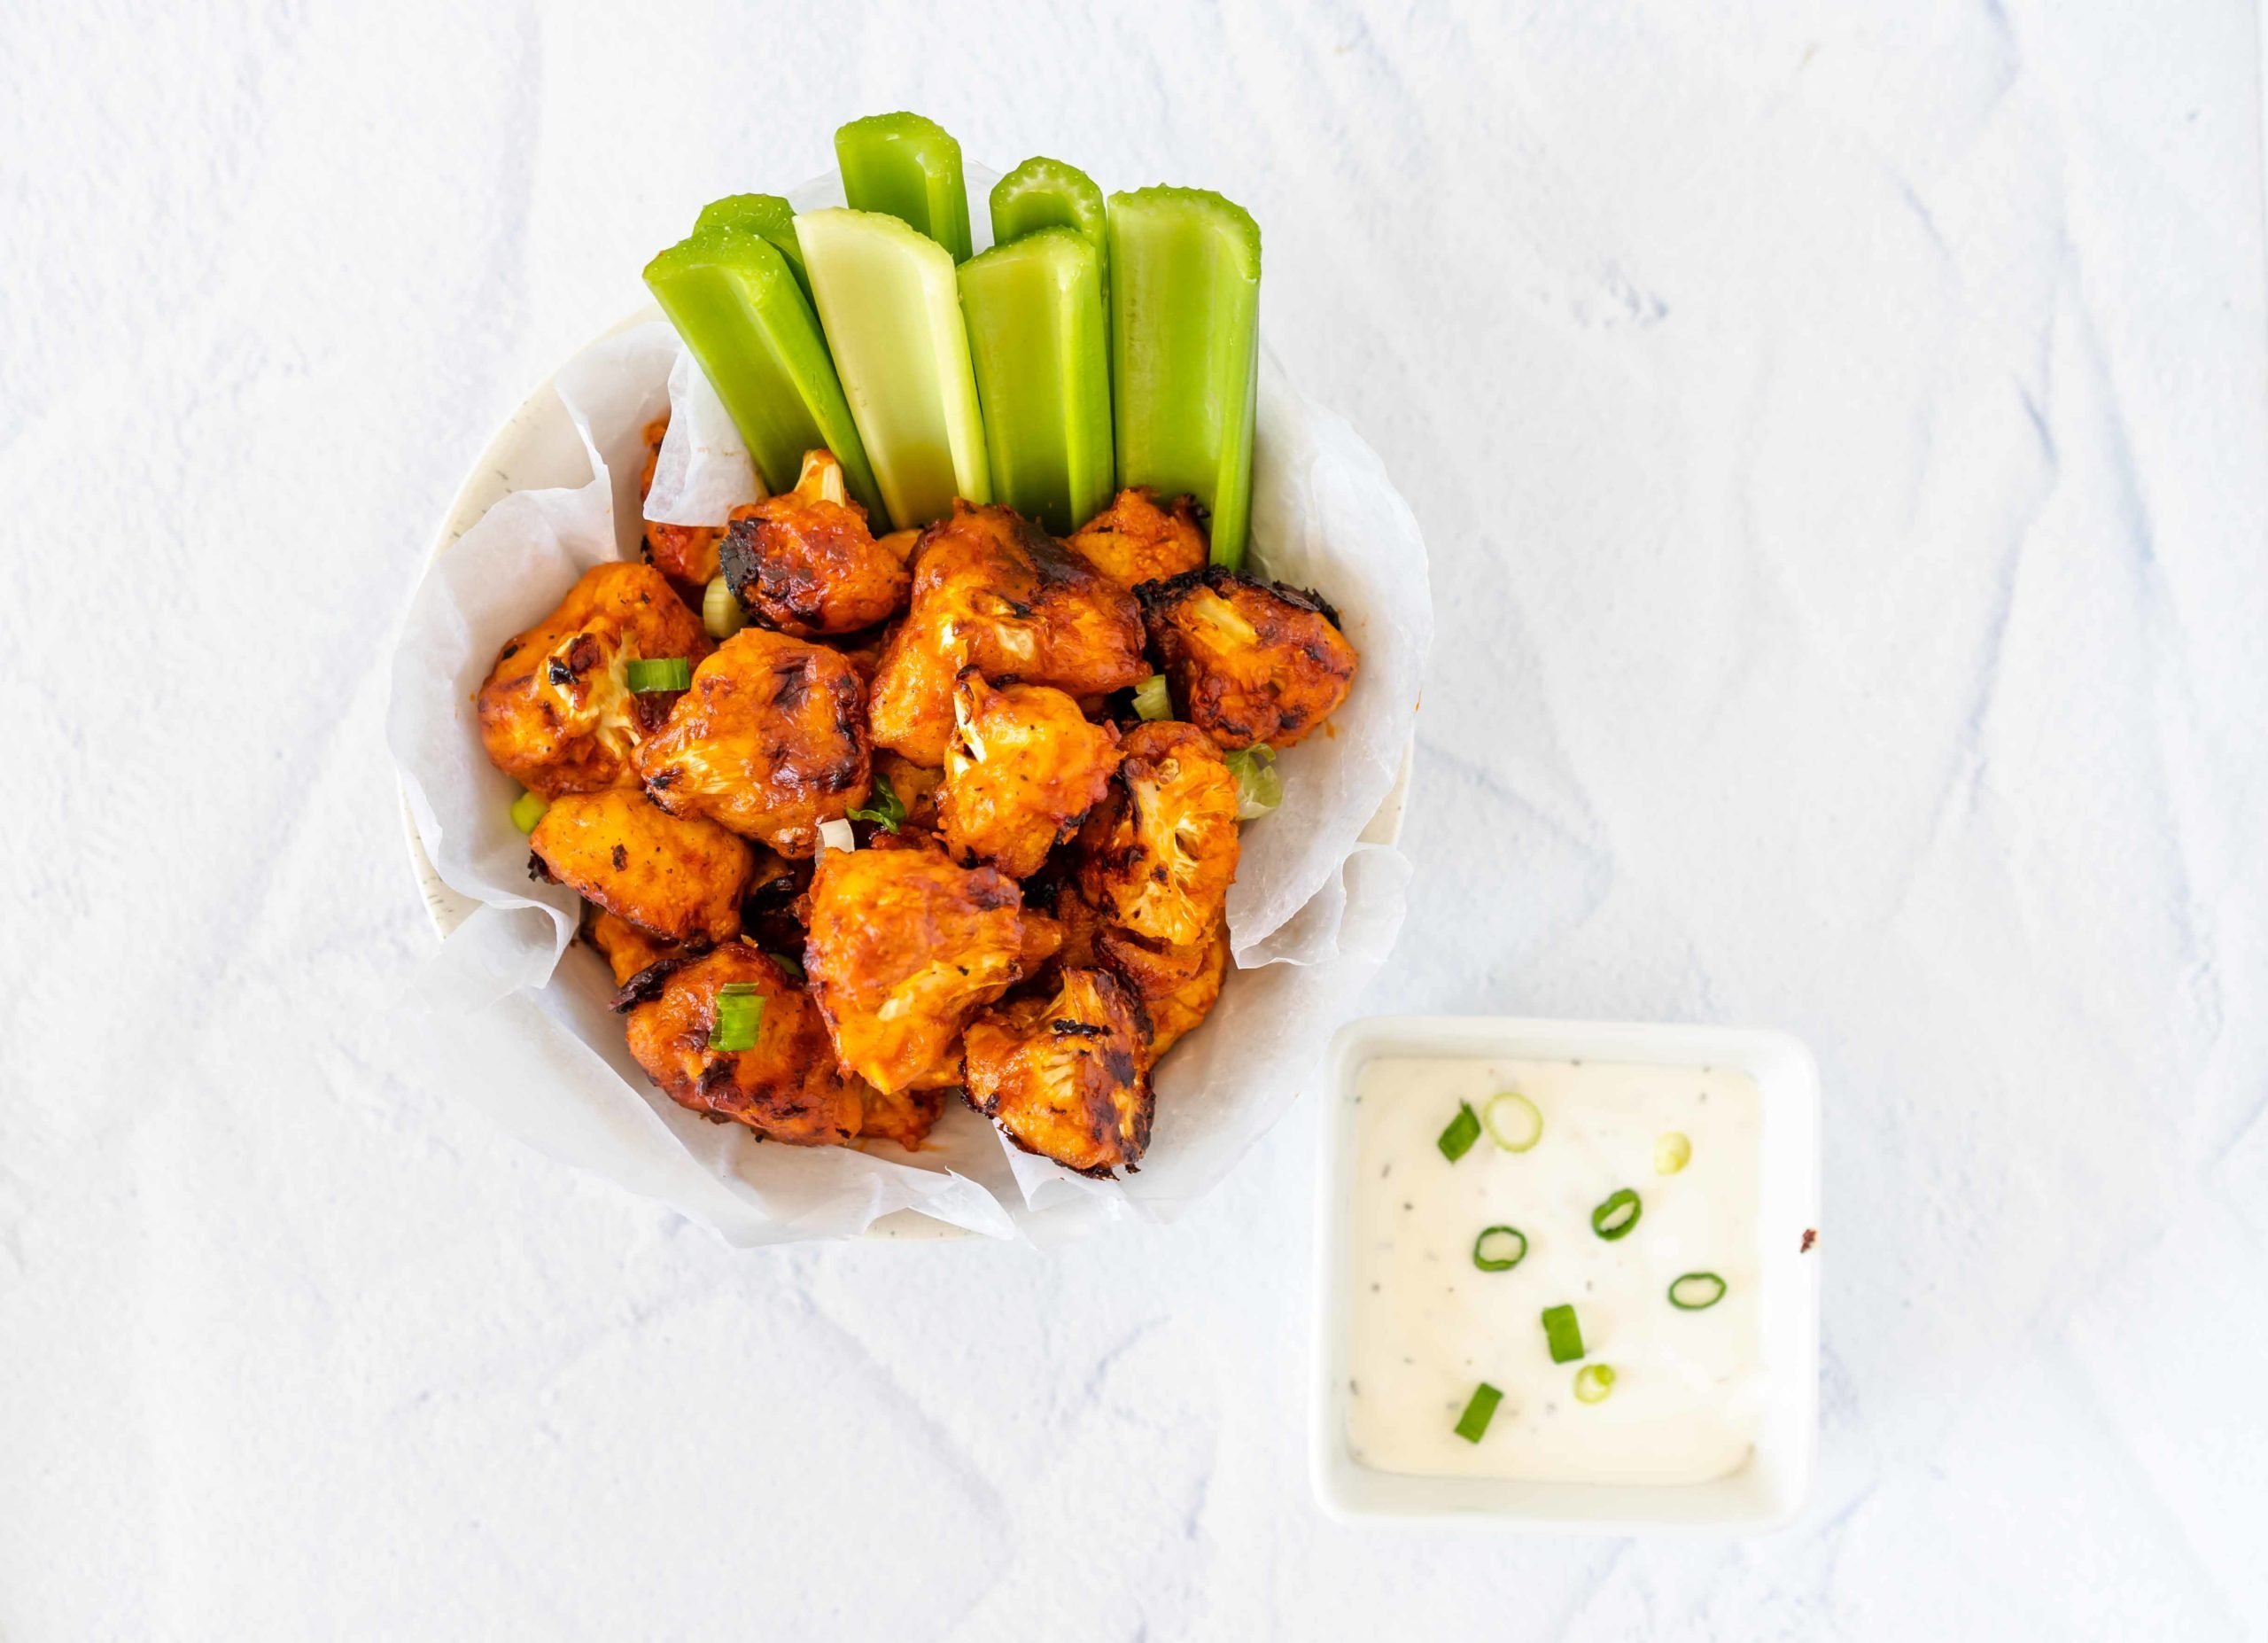 Delicious buffalo cauliflower enhanced with Super Youth Unflavored collagen and served with celery and chive dip